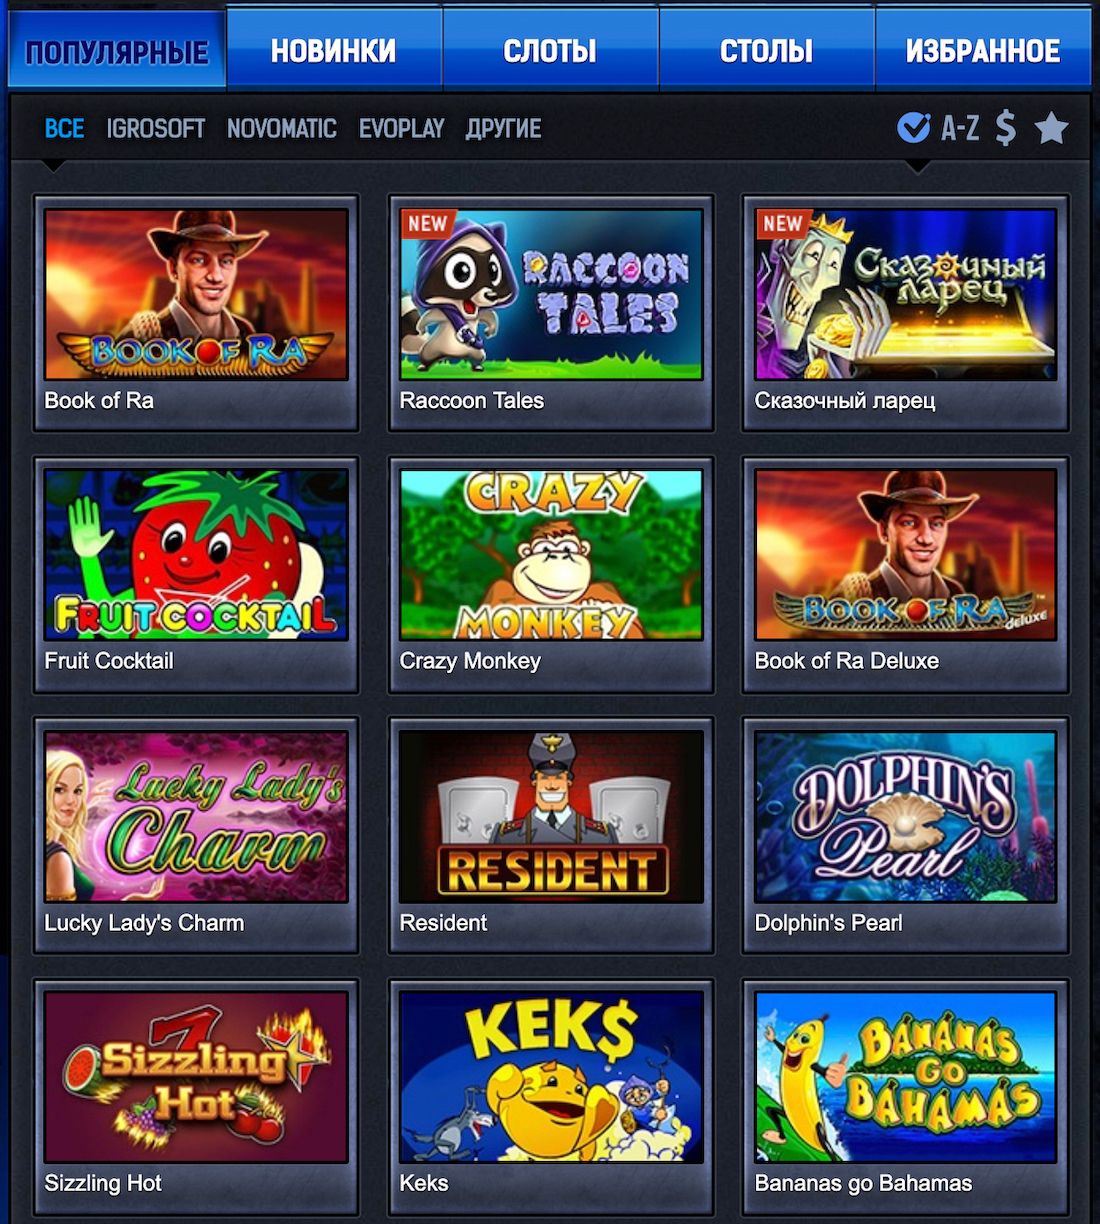 Daily no deposit free spins